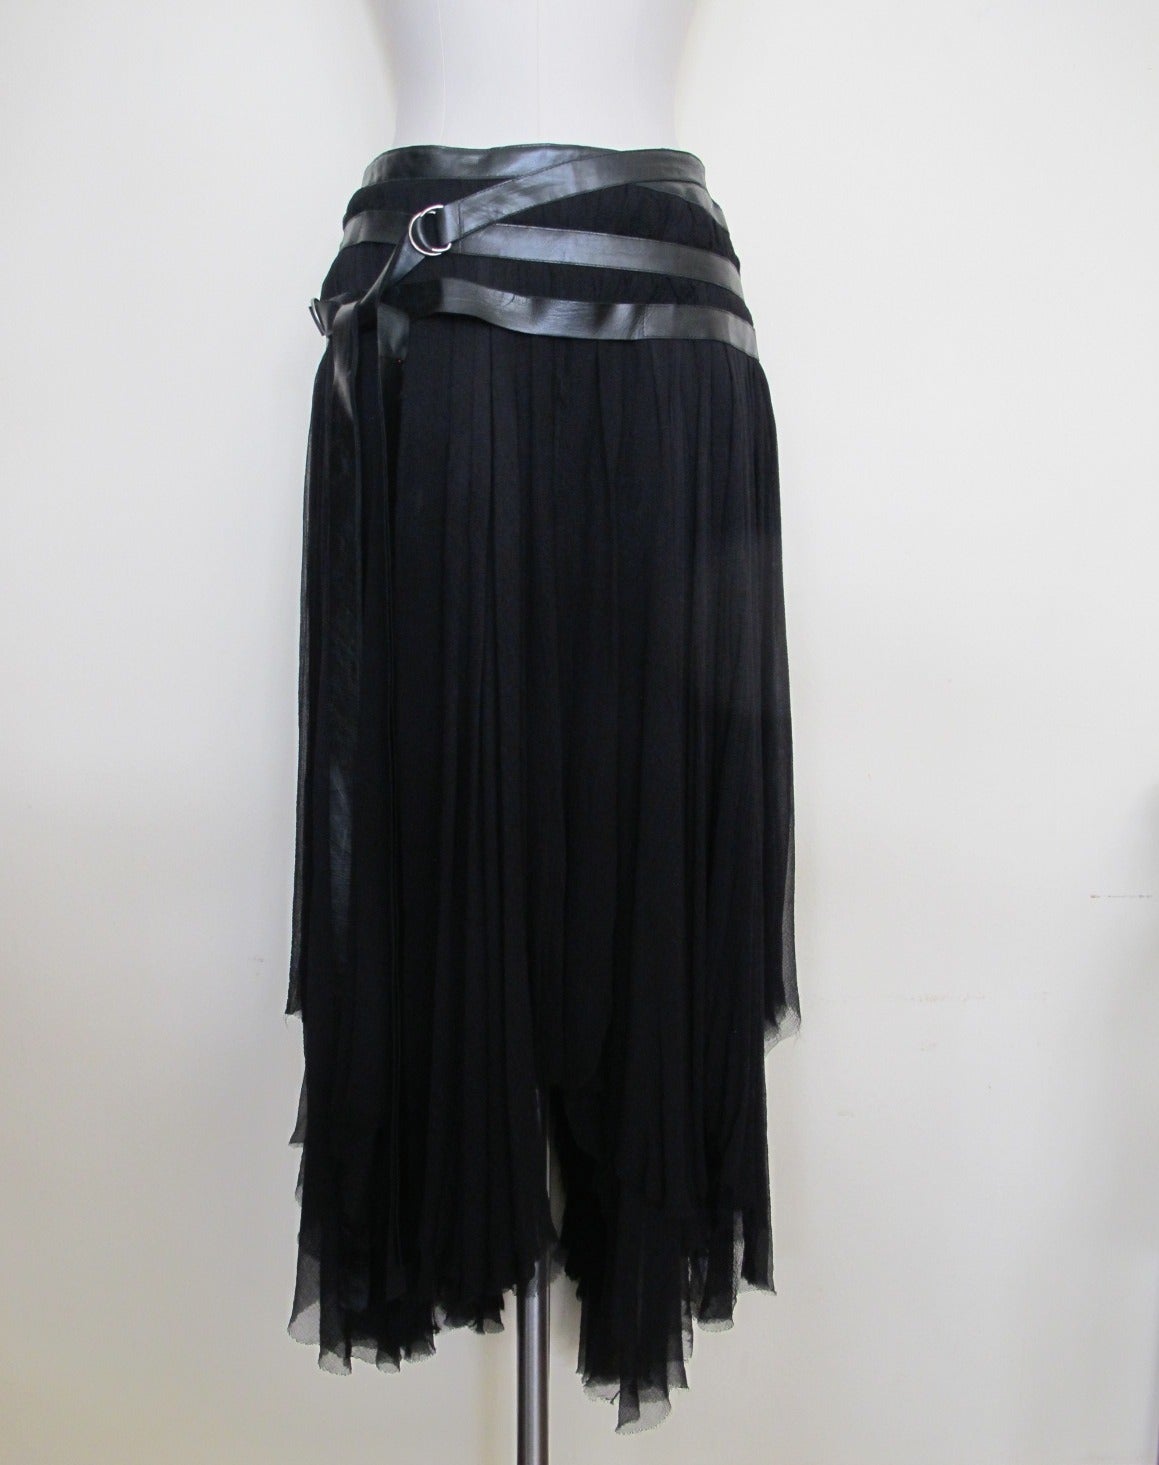 Hipster-Harness design black skirt with one inch genuine leather straps circling the hip with leather ties cascading to bottom of skirt. The silk chiffon has been created to cause the effect of different lengths. The wrap belt accentuates the beauty